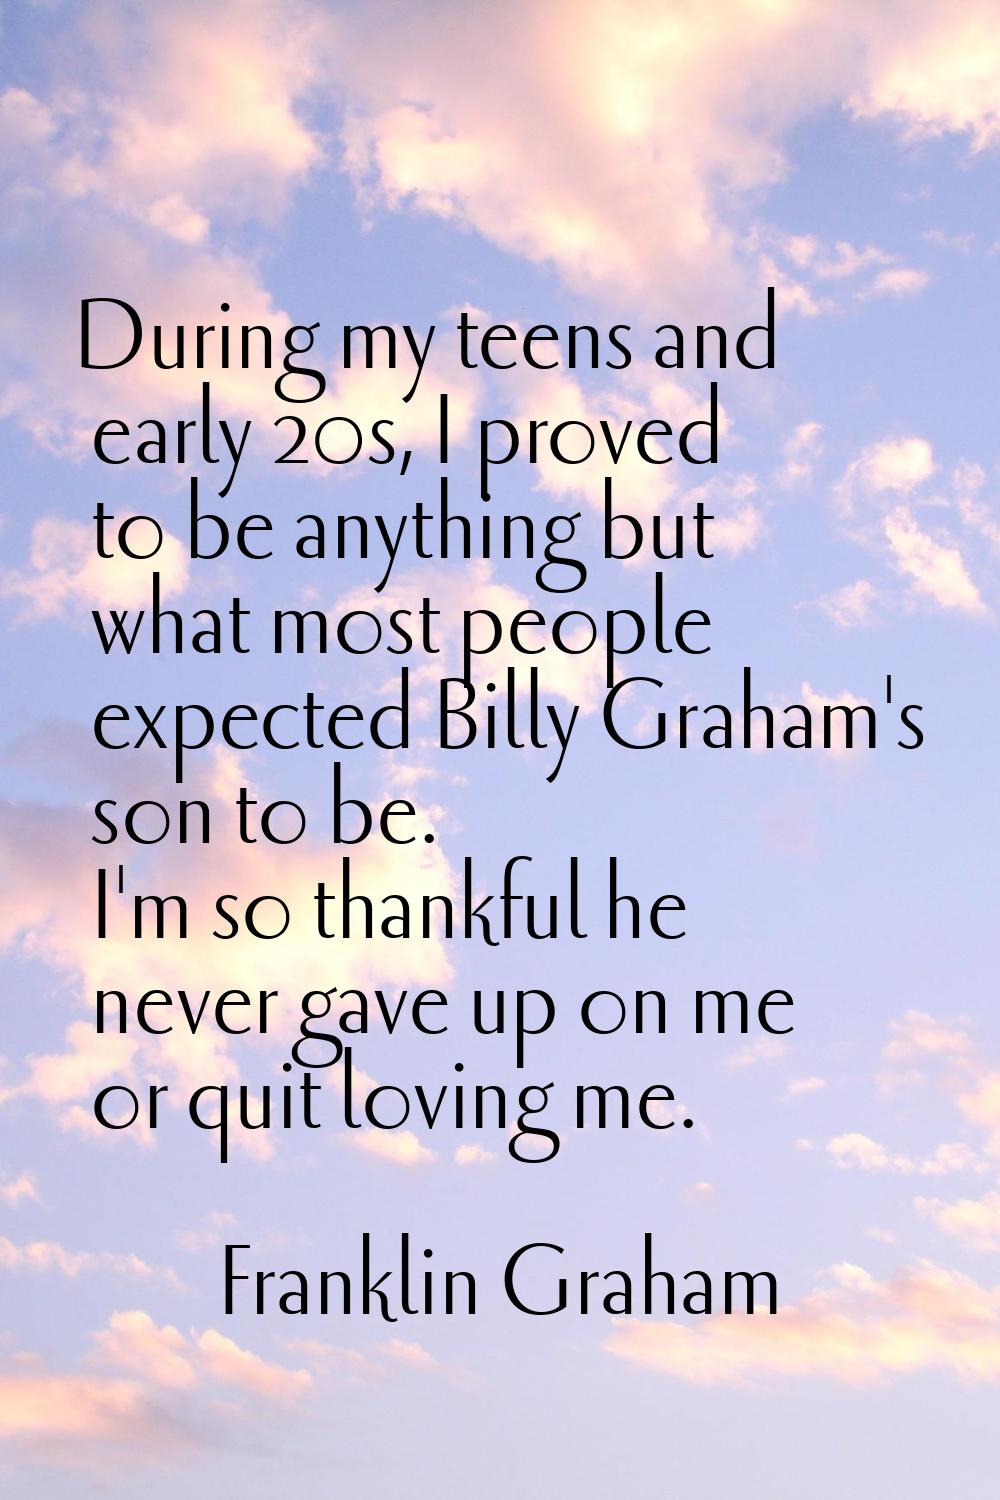 During my teens and early 20s, I proved to be anything but what most people expected Billy Graham's